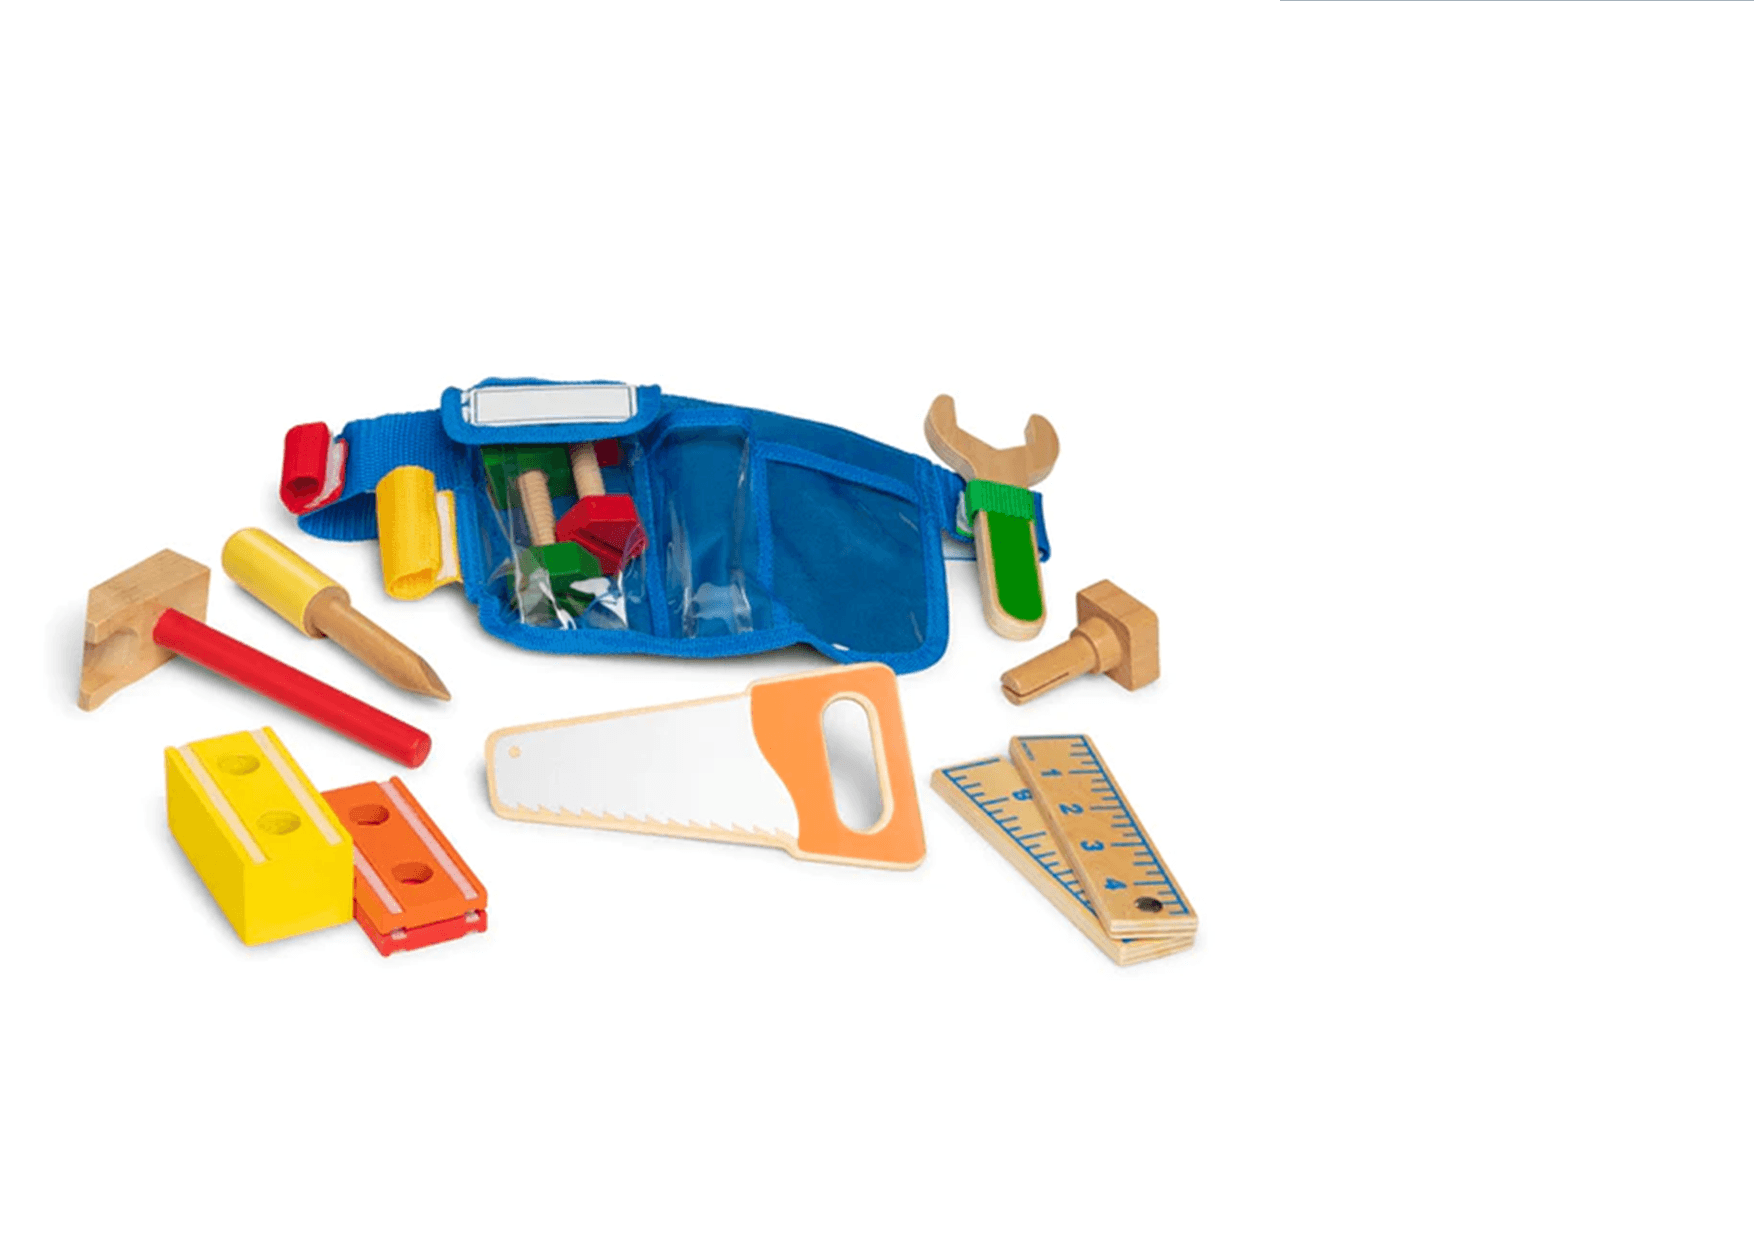 MELISSA & DOUG  Deluxe Tool Belt Set: This set helps teach sorting, problem solving, and counting skills, and encourages fine motor skills, hand-eye coordination, and imaginative play - M&D-5174